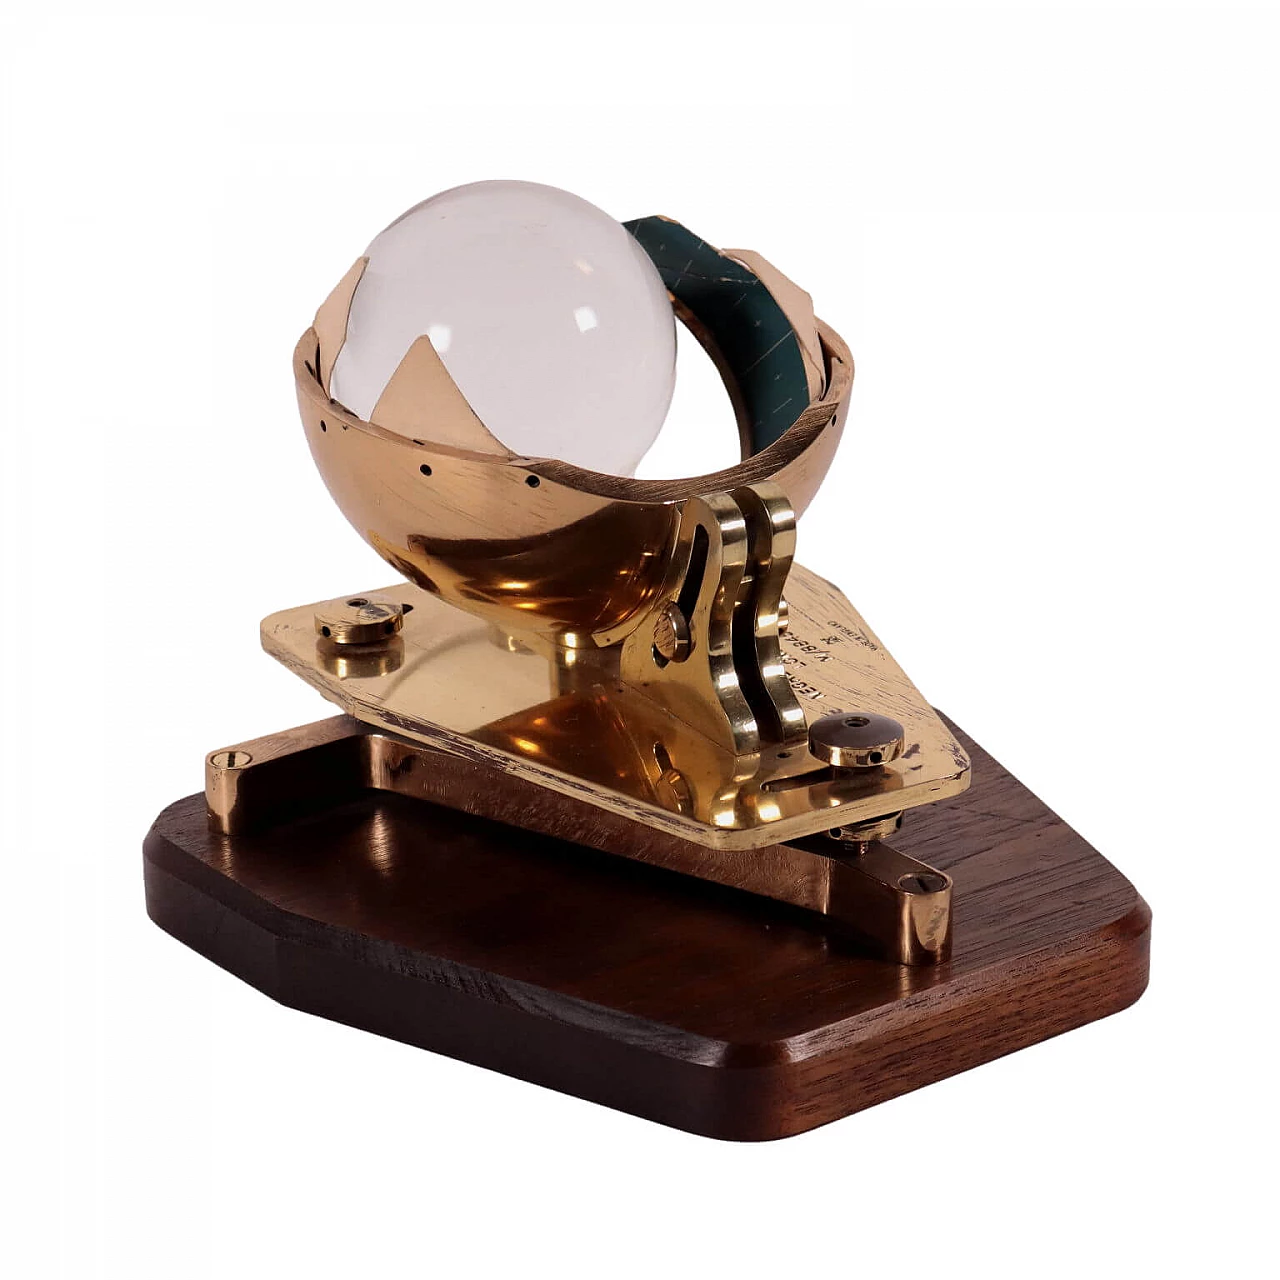 Campbell-Stokes heliograph in brass and optical glass, 19th century 1